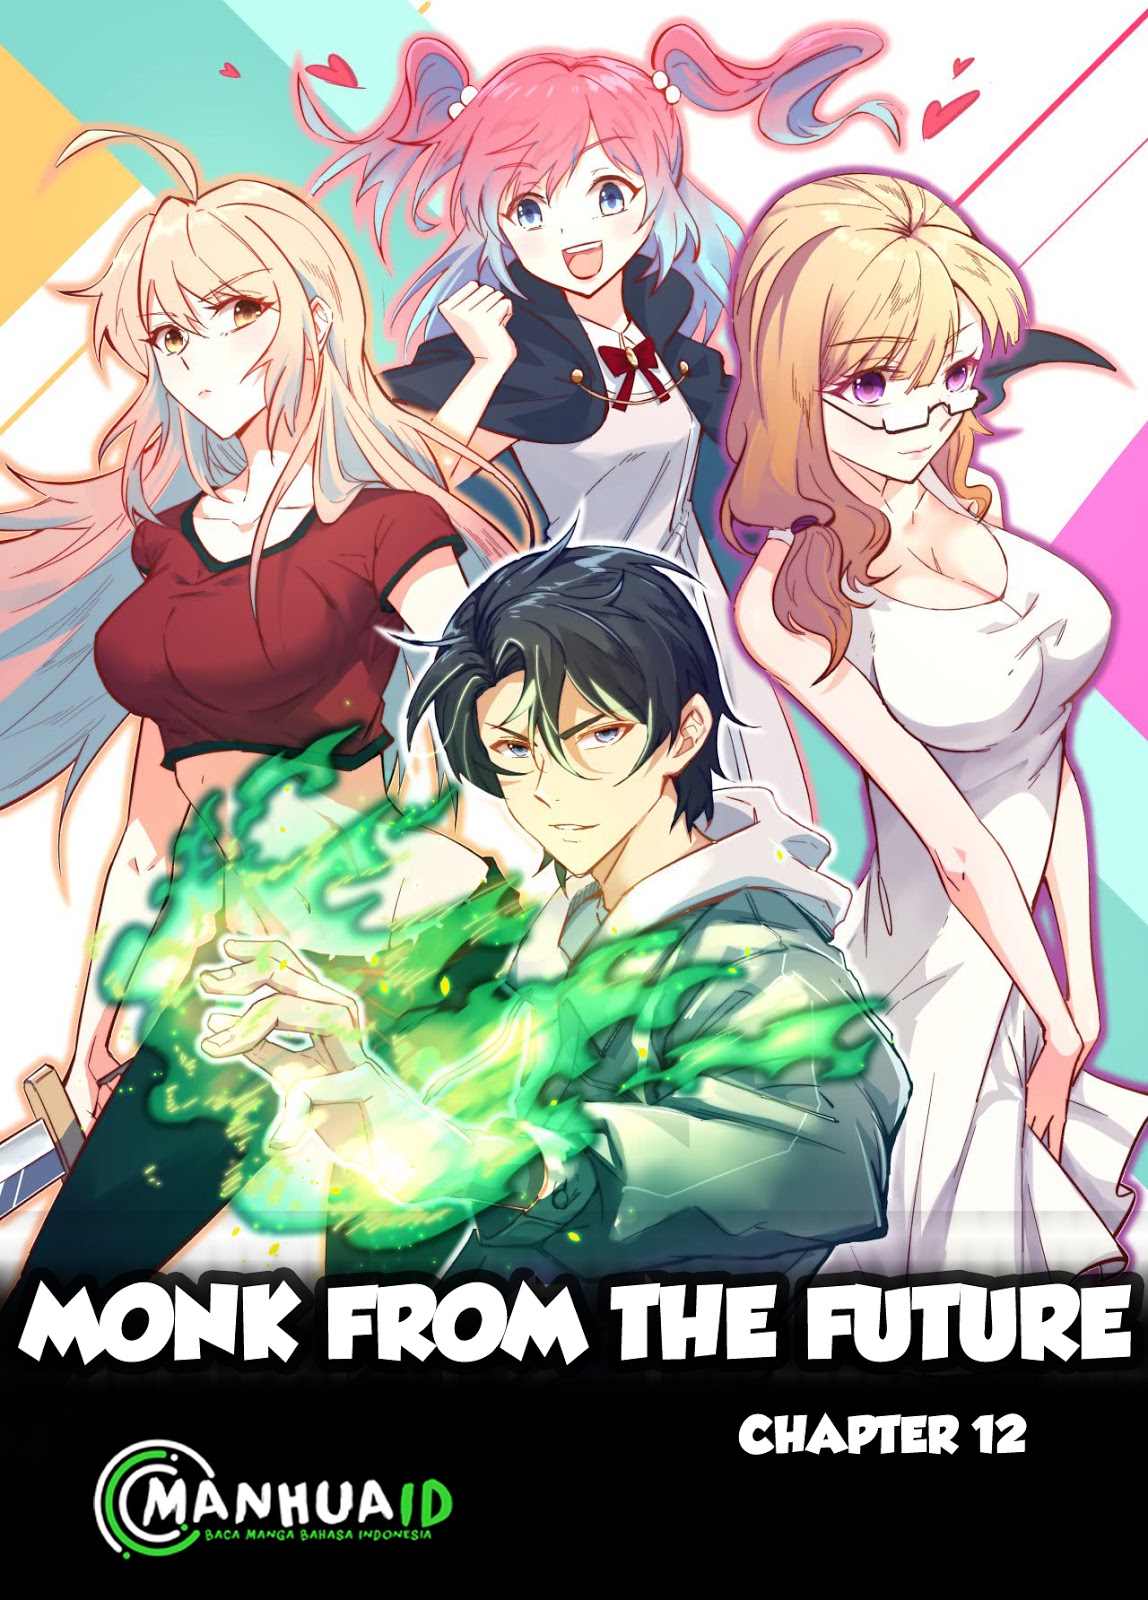 Monk From the Future Chapter 12